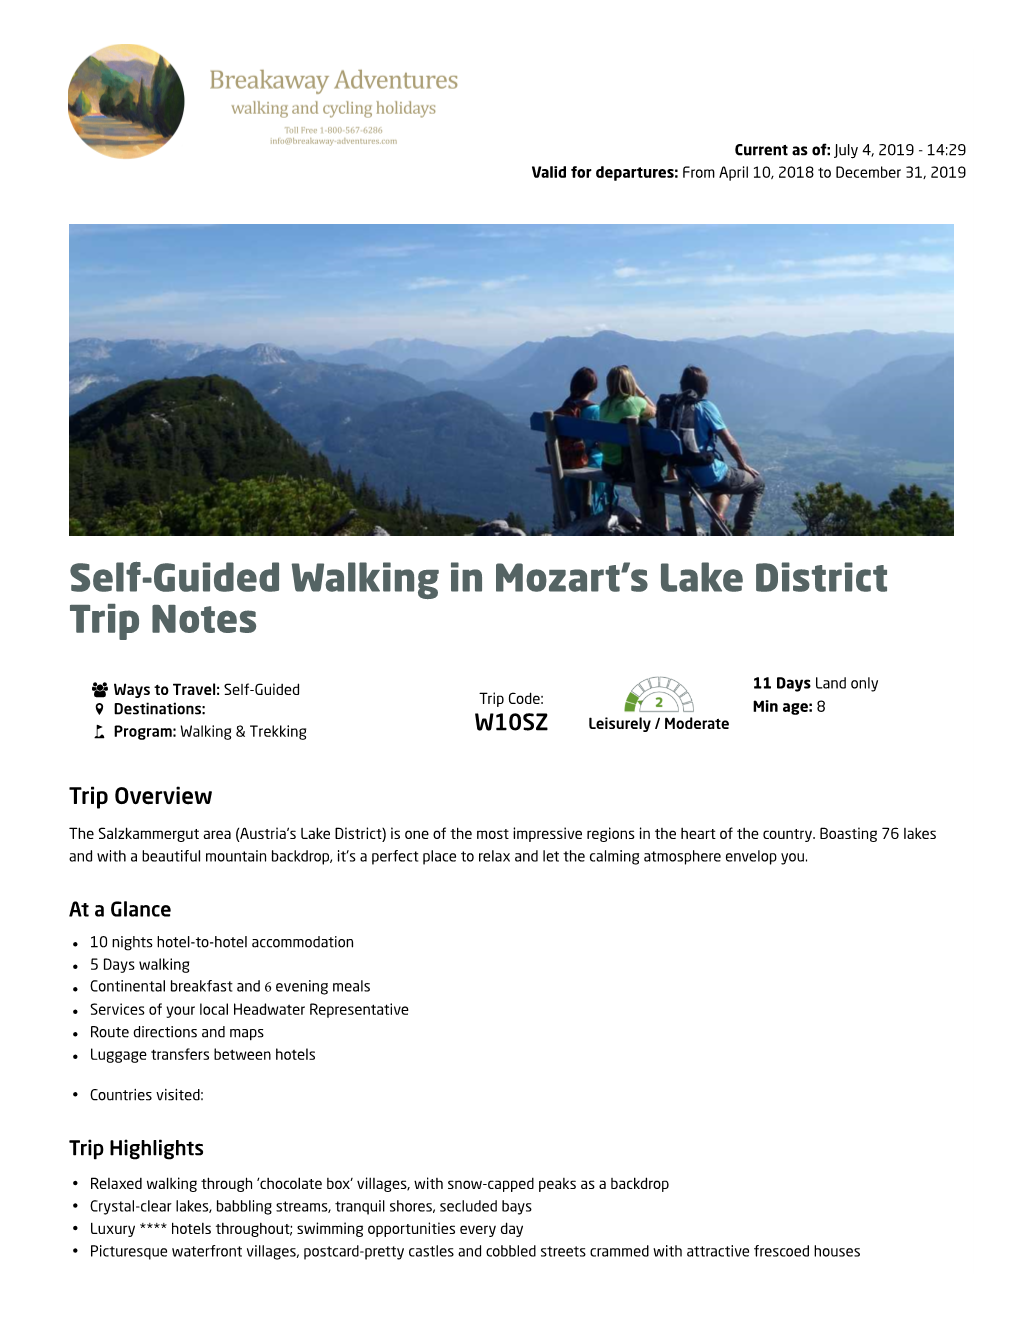 Self-Guided Walking in Mozart's Lake District Trip Notes